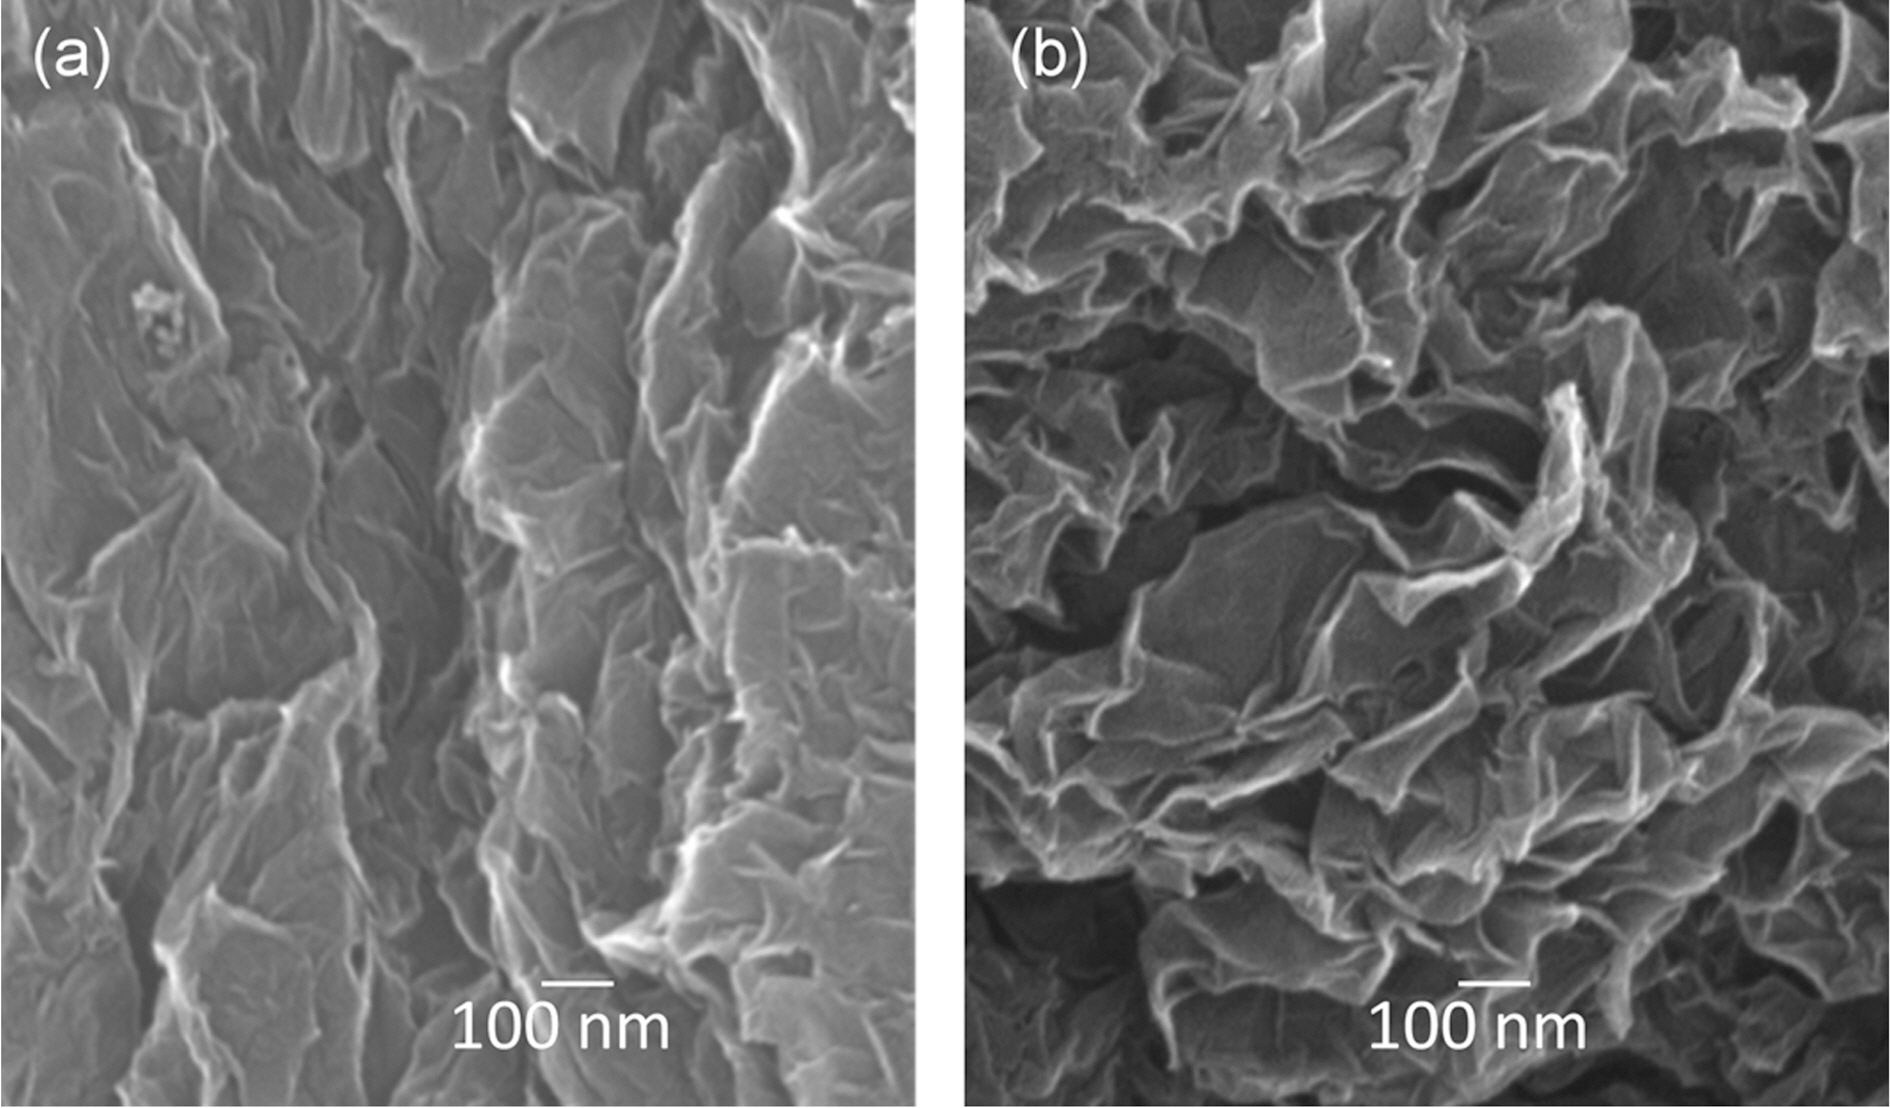 SEM images of (a) synthetic graphene powder and (b)natural graphene powder.